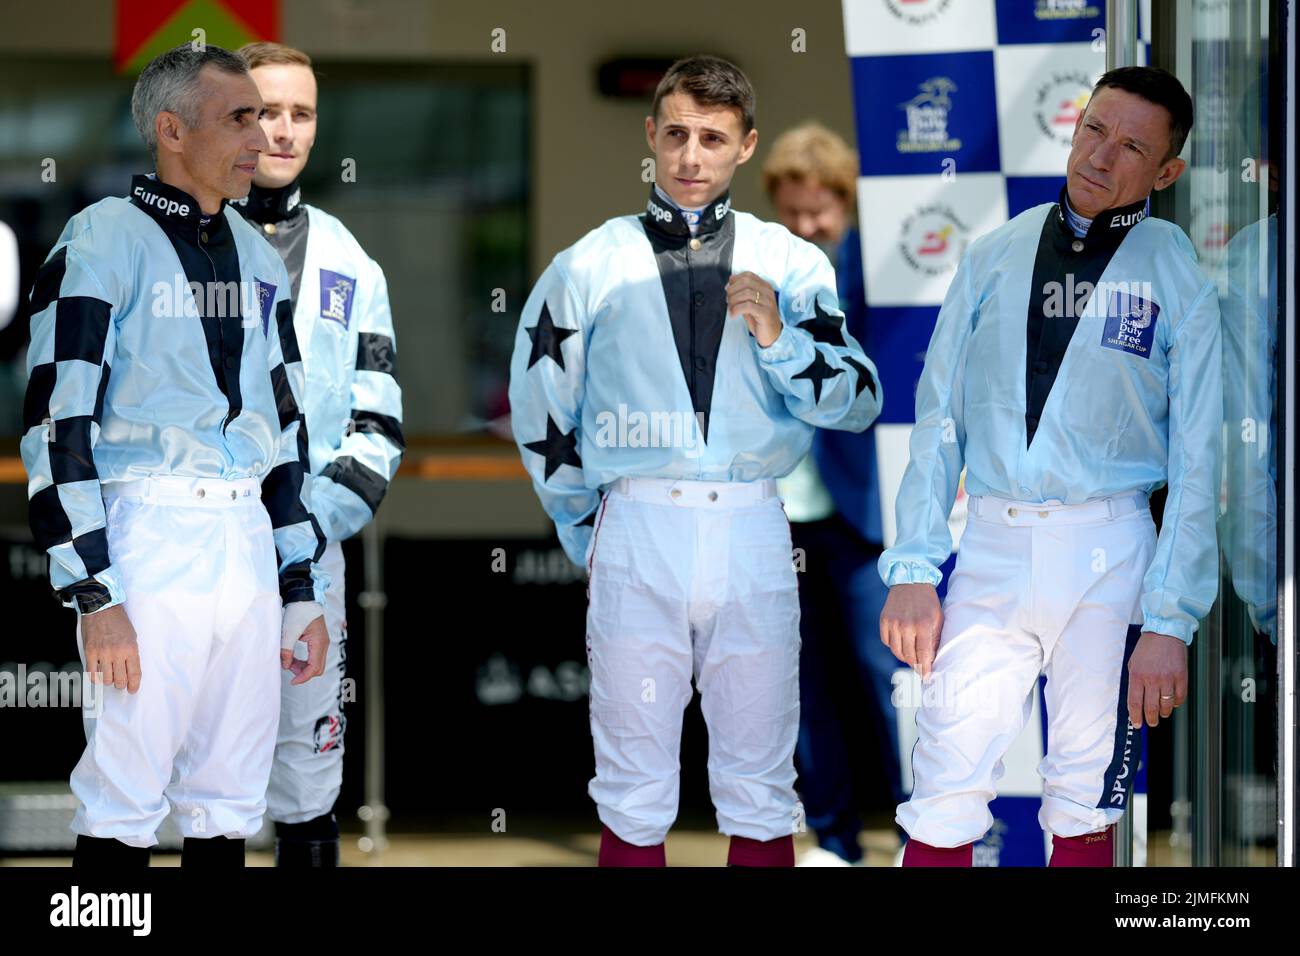 Team Europe captained by Frankie Dettori (far right) alongside Jose-Luis Martinez, Rene Piechulek and Antonio Fresu during the Shergar Cup Meeting at Ascot Racecourse. Picture date: Saturday August 8, 2022. Stock Photo